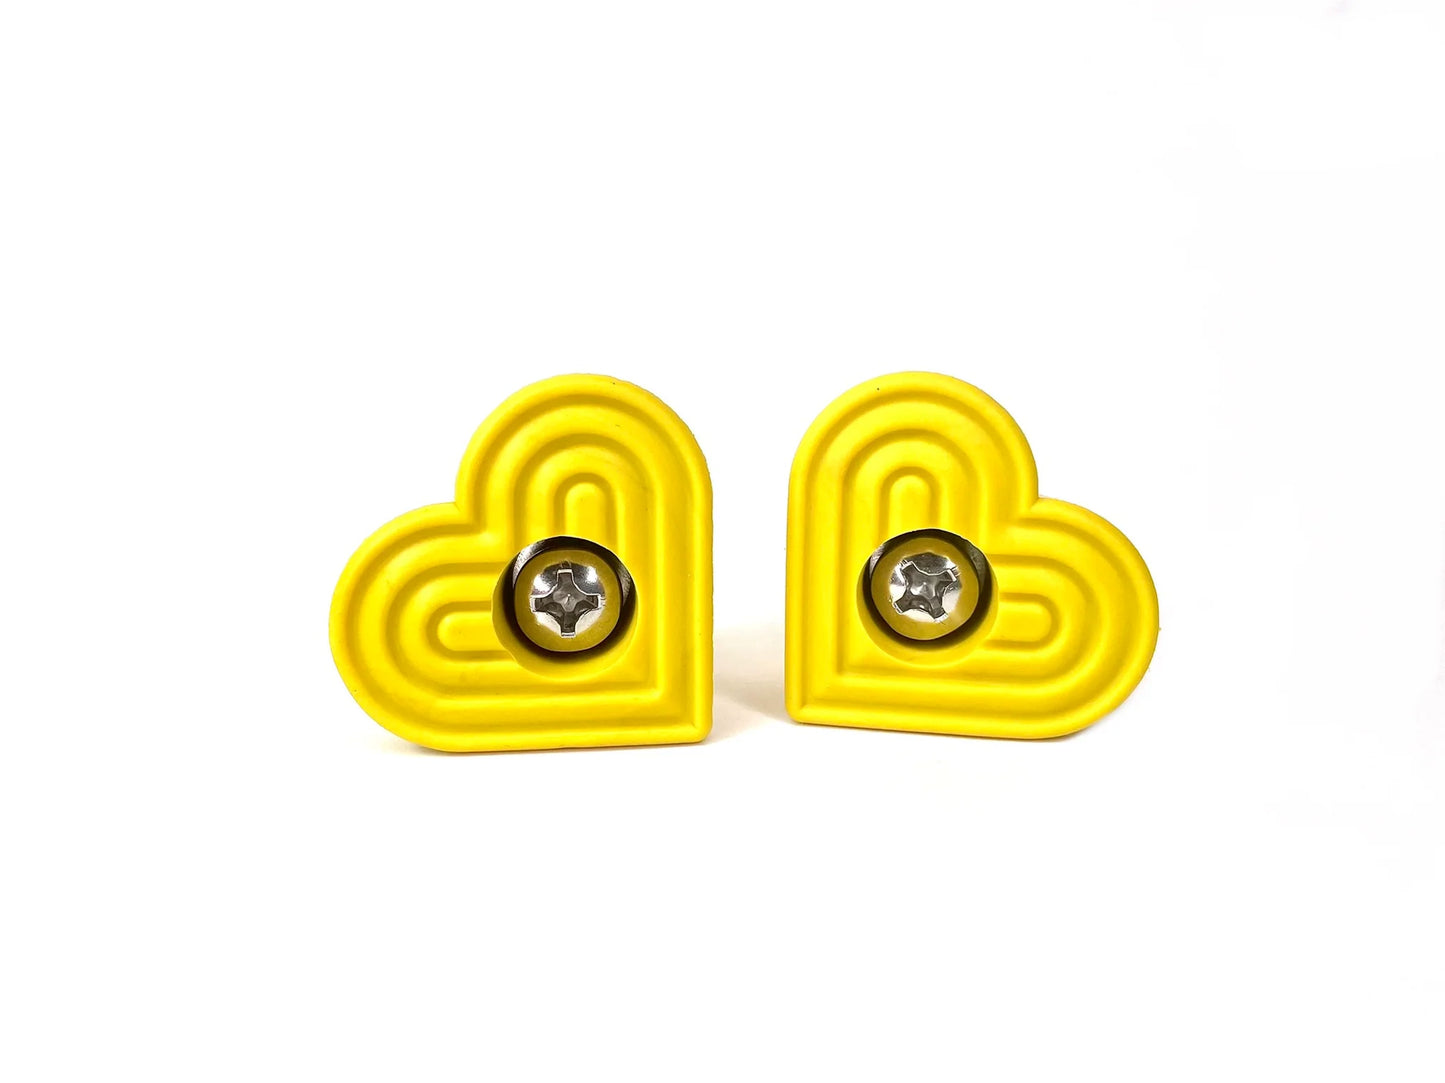 GRINDSTONE BOLT ON HEART STOPPERS-YELLOW